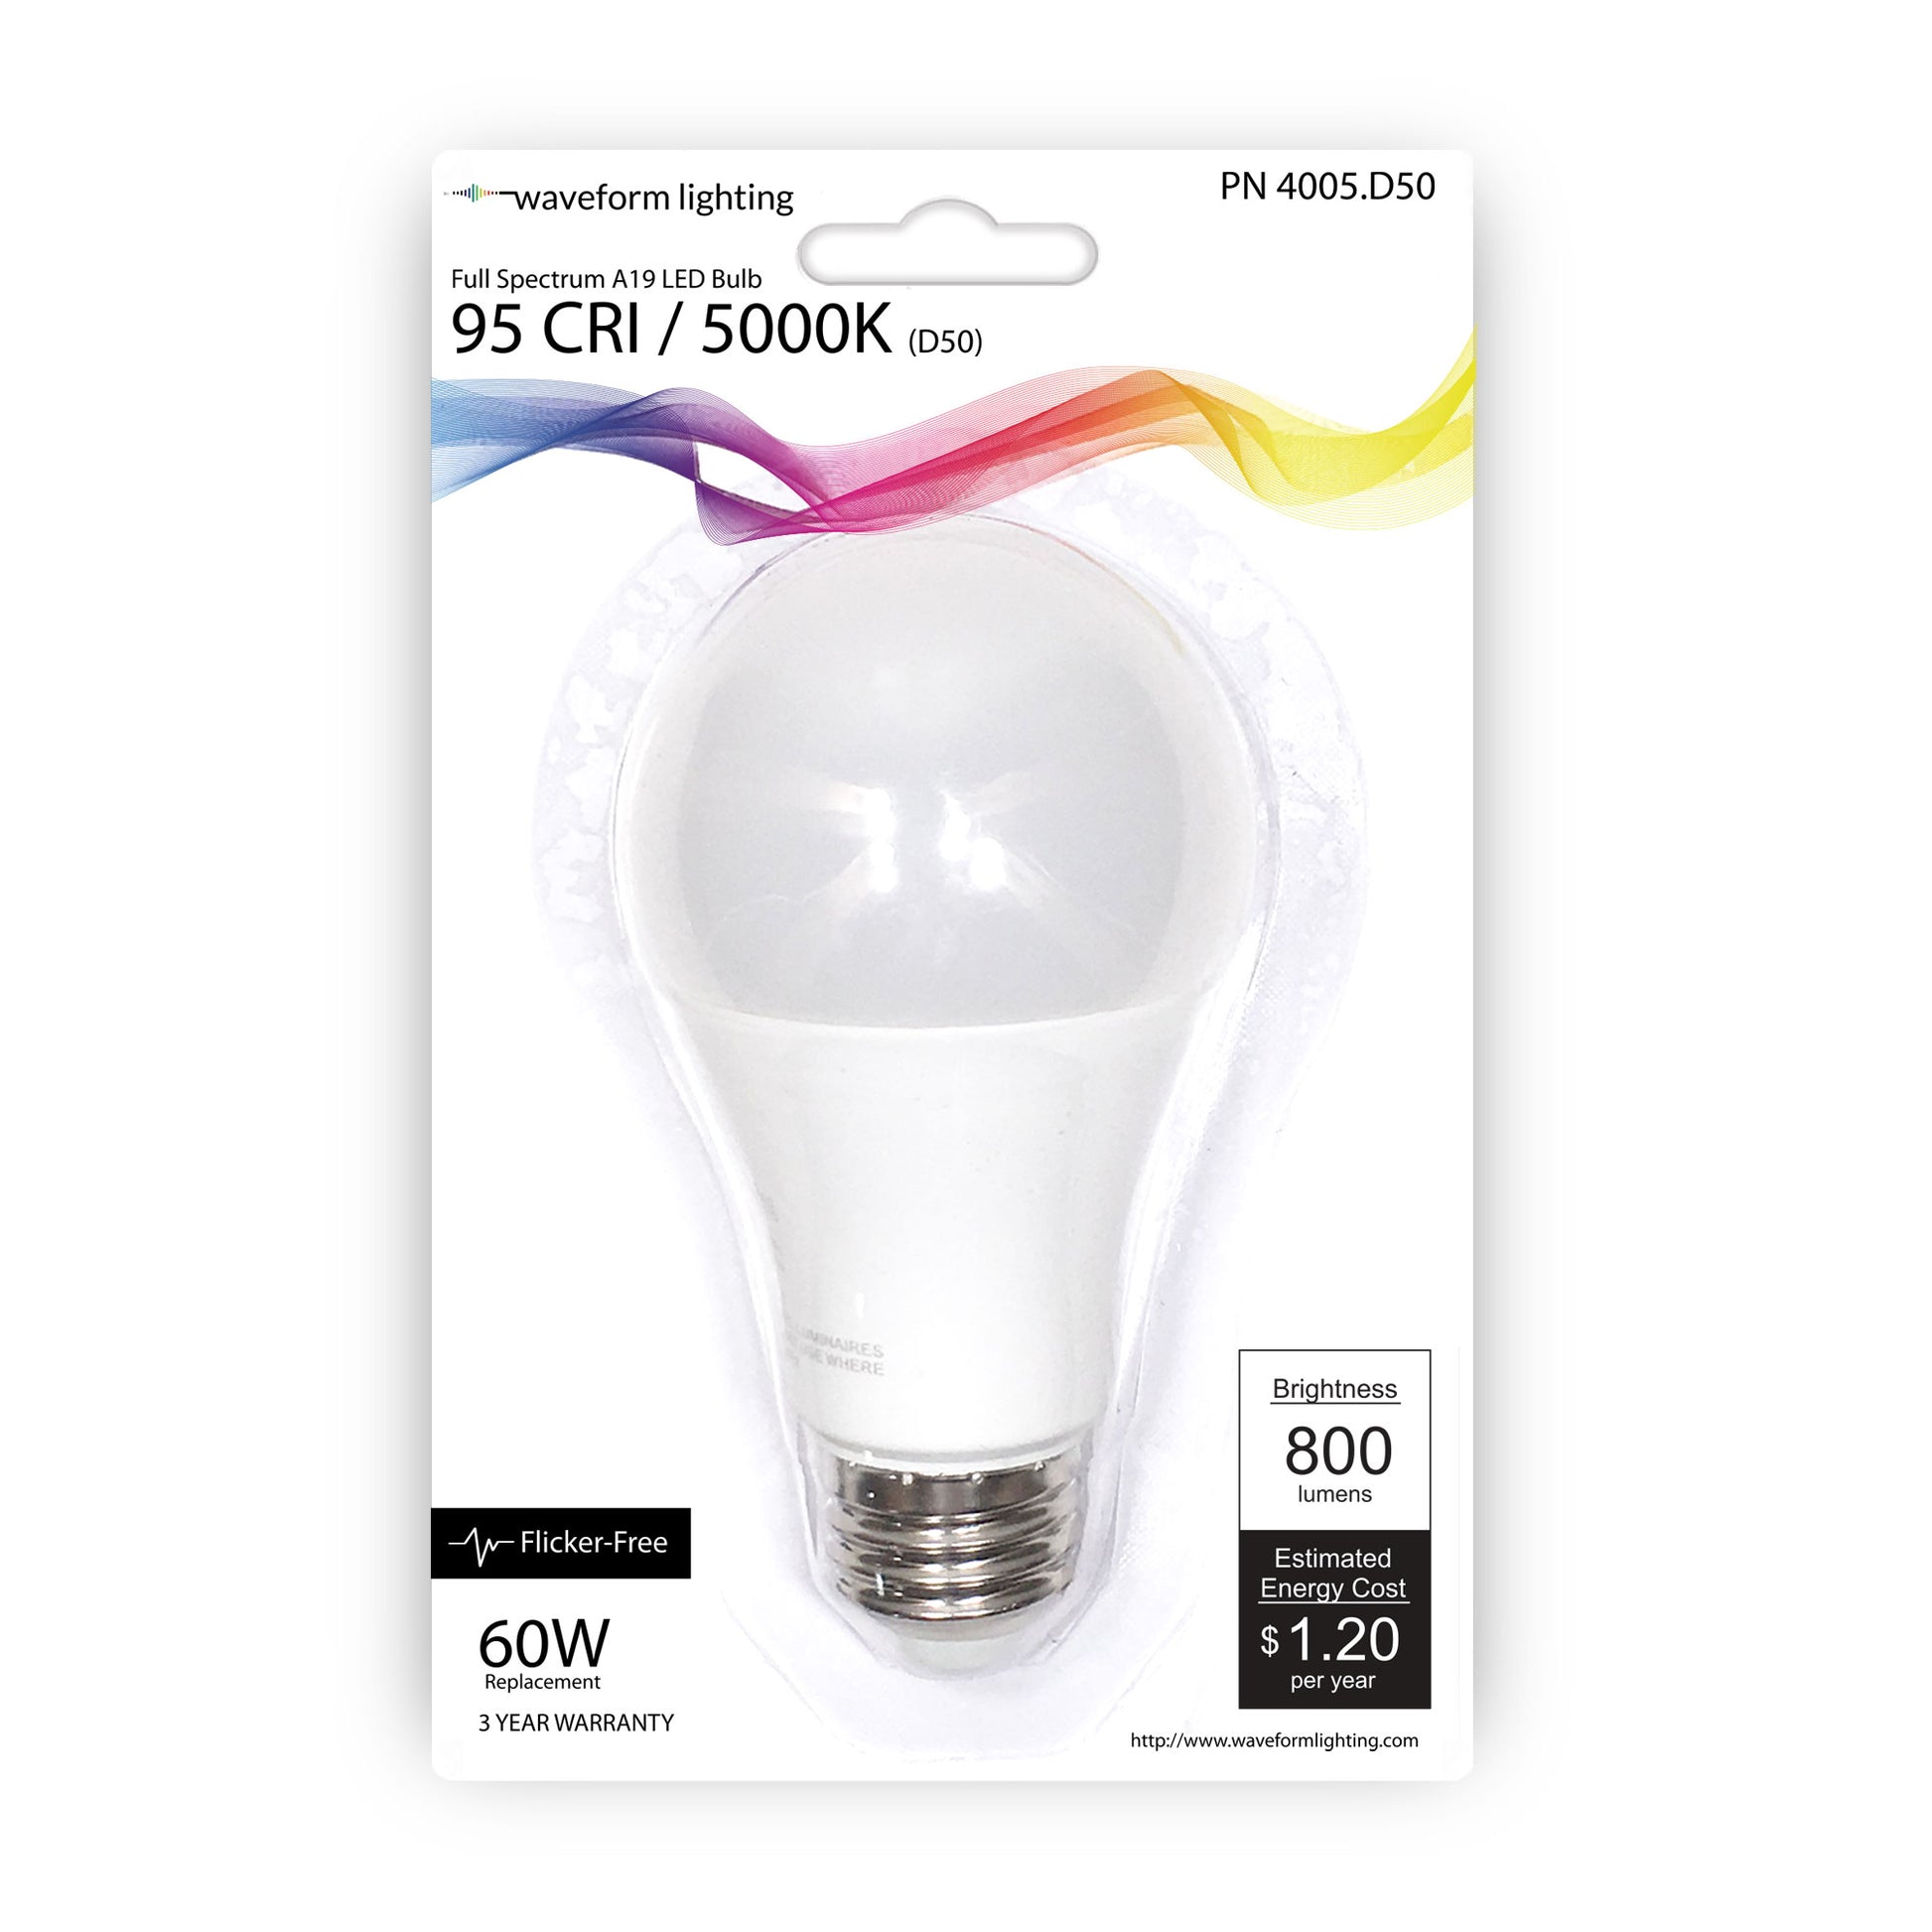 D50 5000K A19 LED Bulb for Color Matching (ISO3664:2000) –